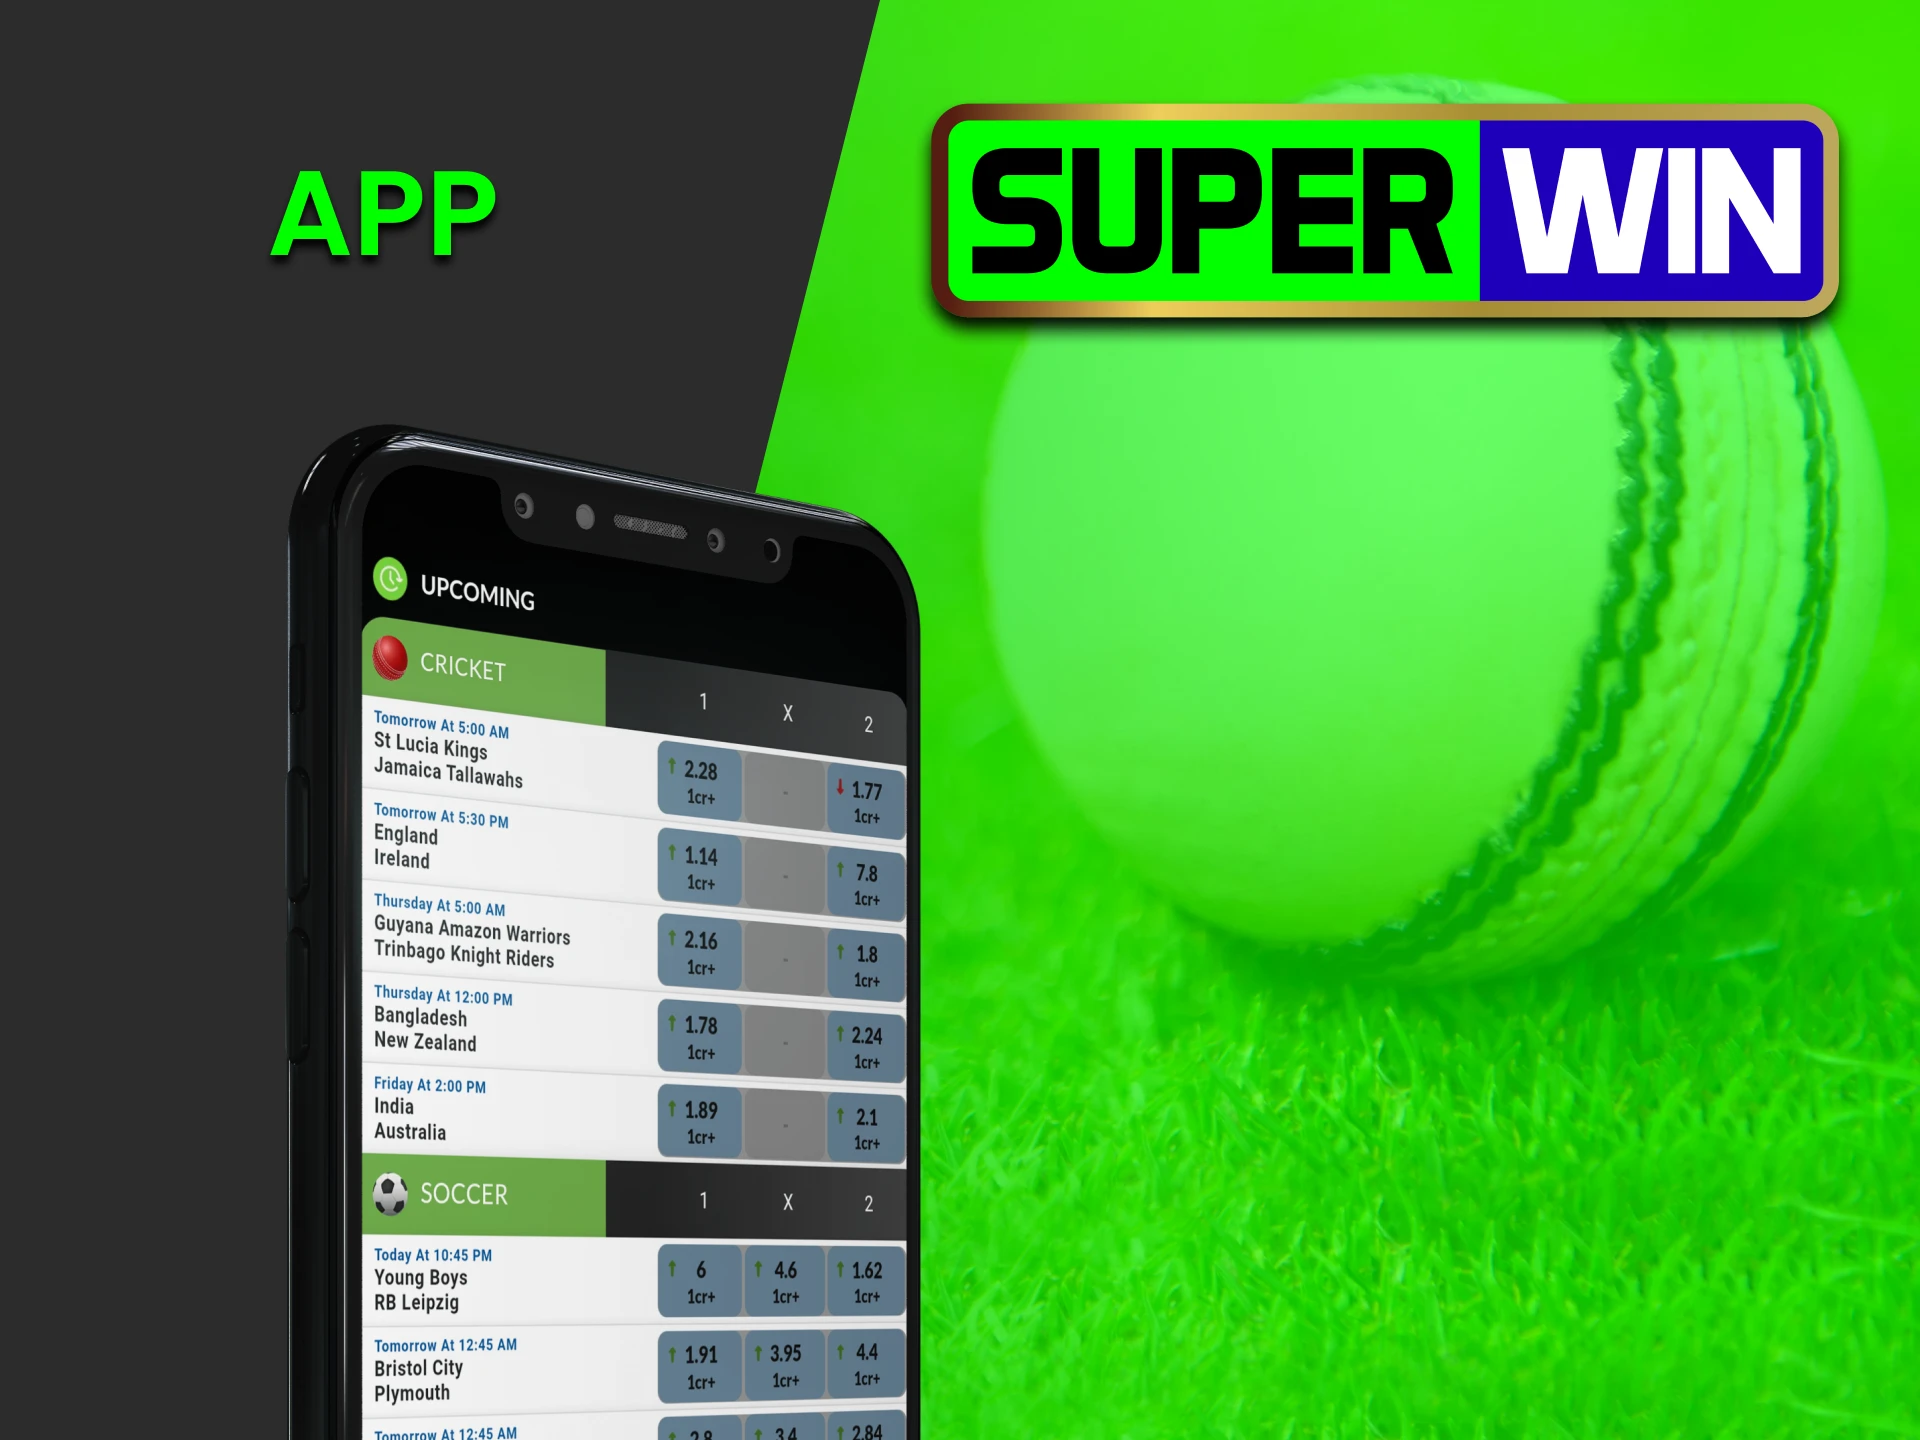 Download the Superwin app for cricket betting.